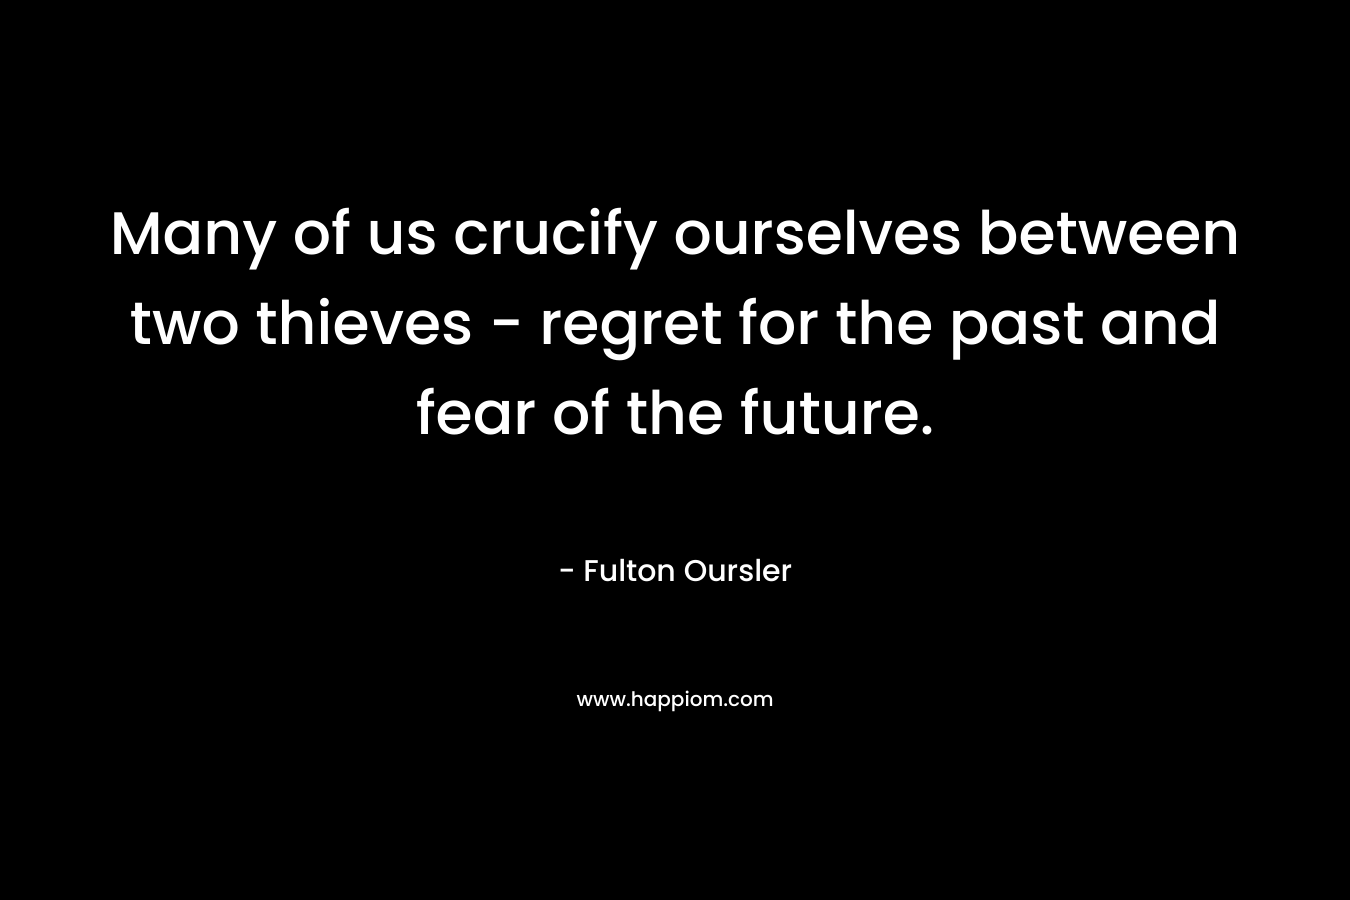 Many of us crucify ourselves between two thieves – regret for the past and fear of the future. – Fulton Oursler